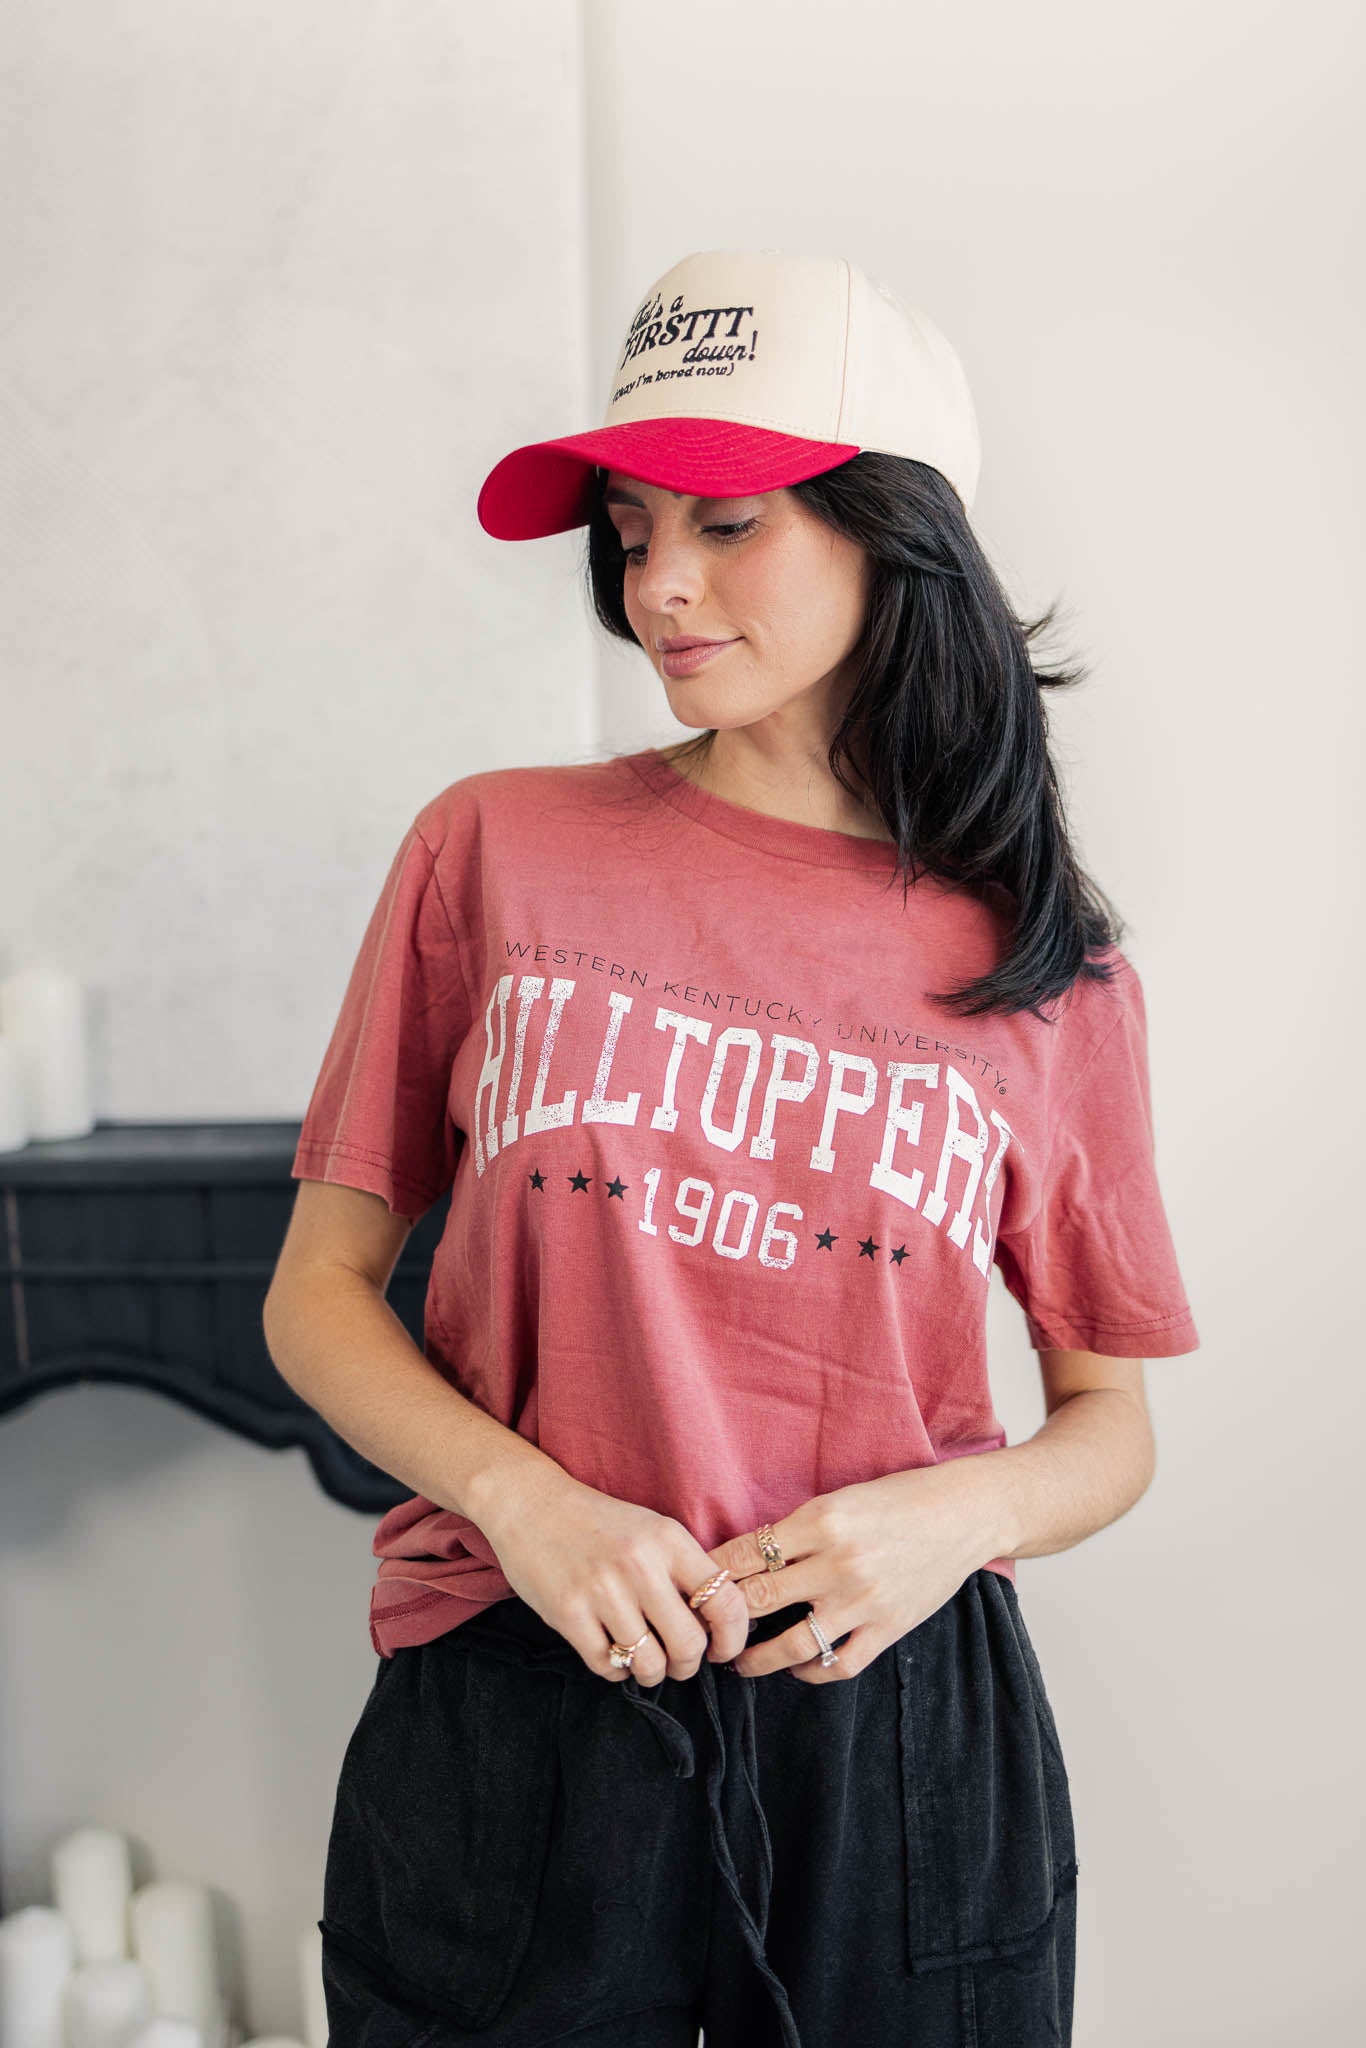 The Hilltopper Classic Tee